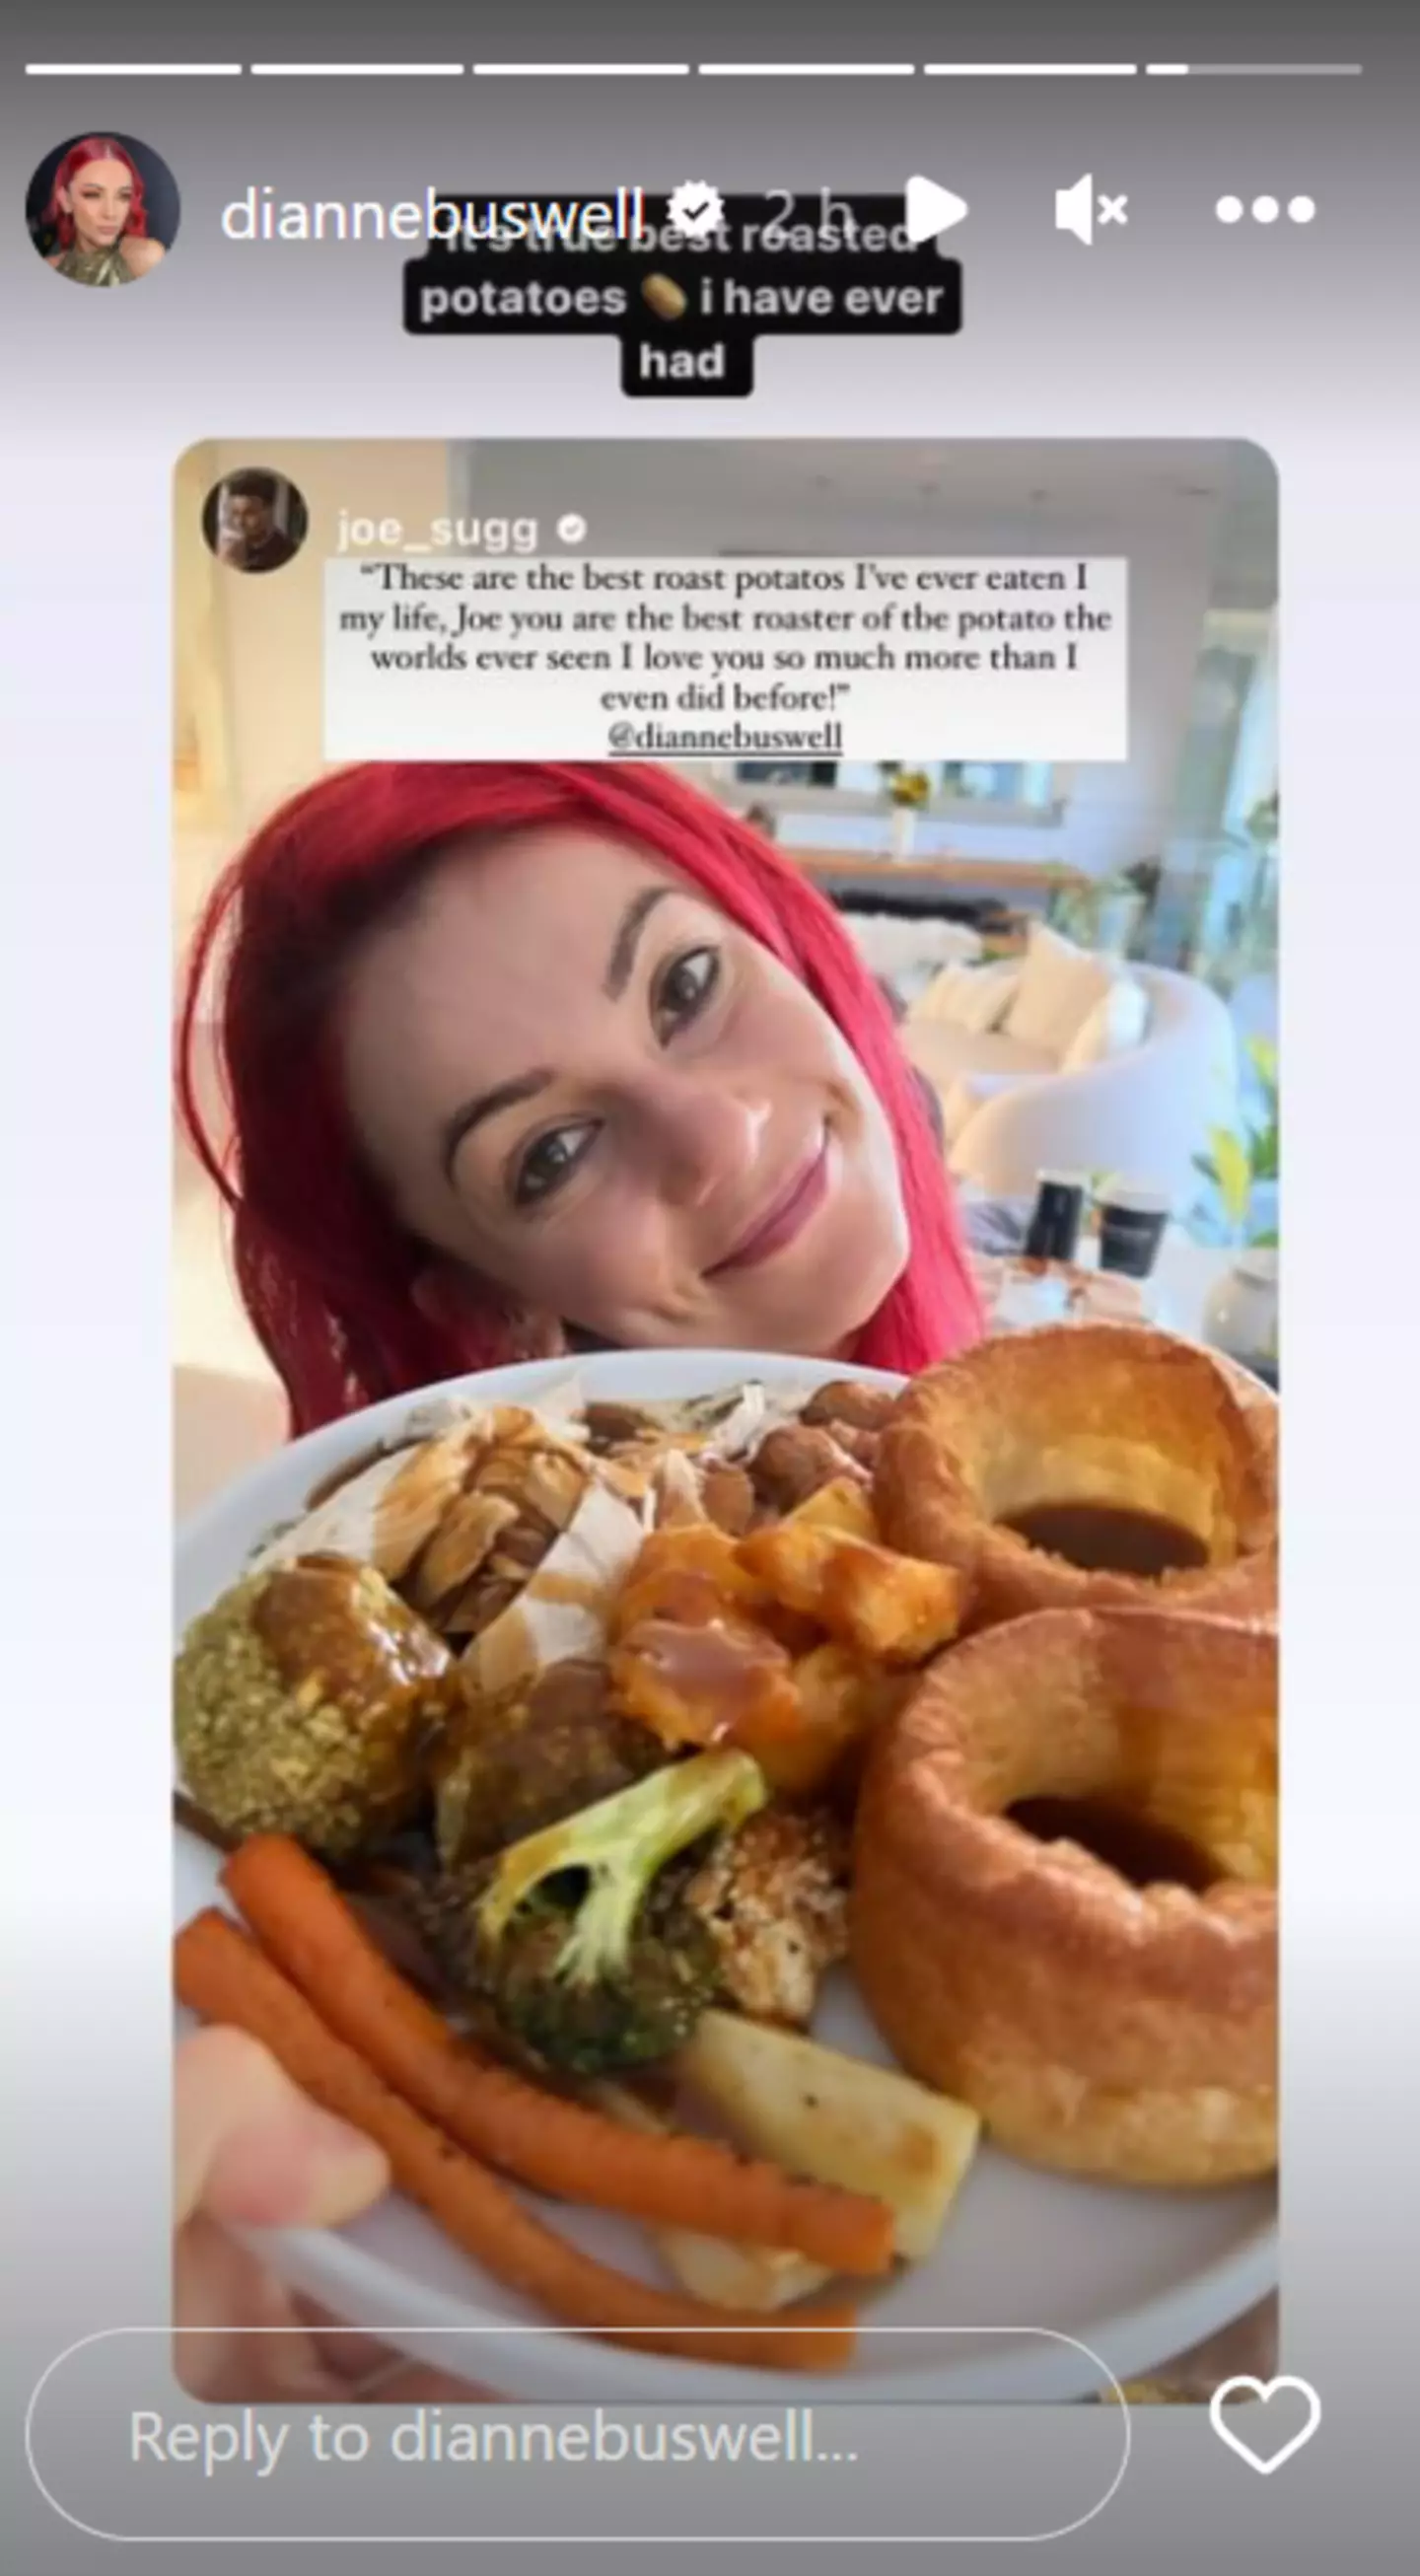 Dianne Buswell was very pleased with the roast.